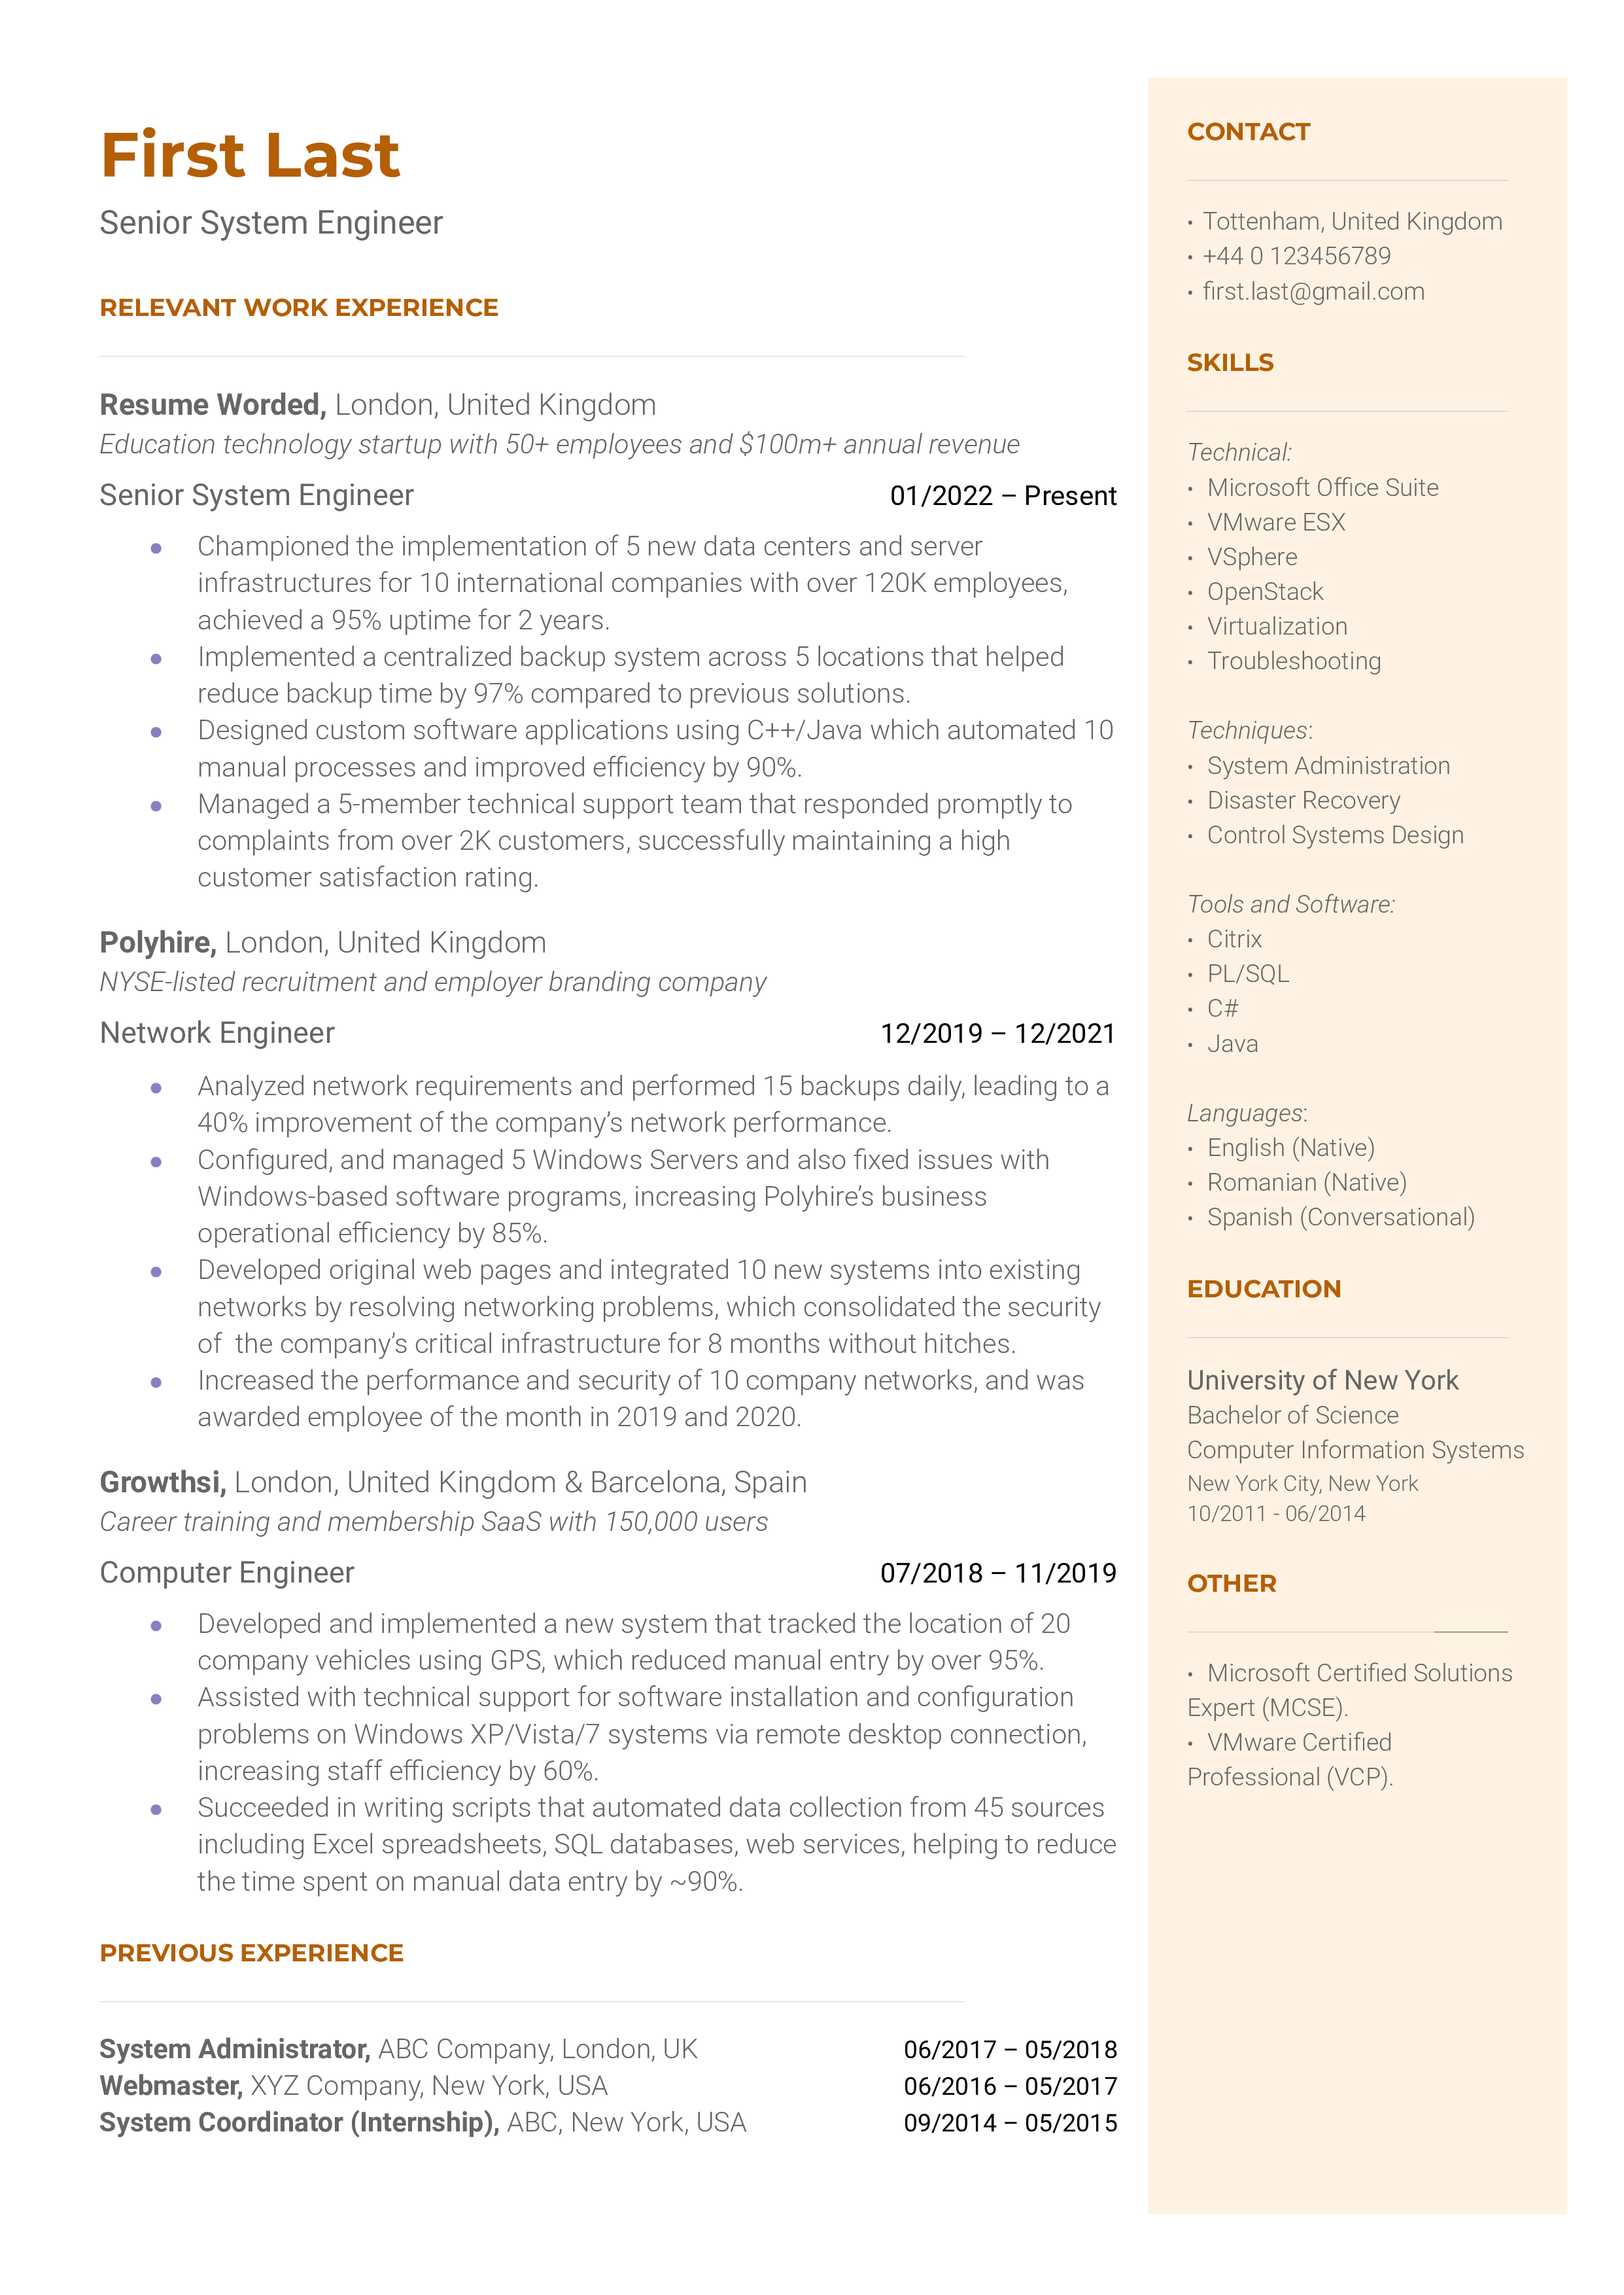 A well-structured CV of a Senior System Engineer showcasing project management skills and proficiency in emerging technologies.